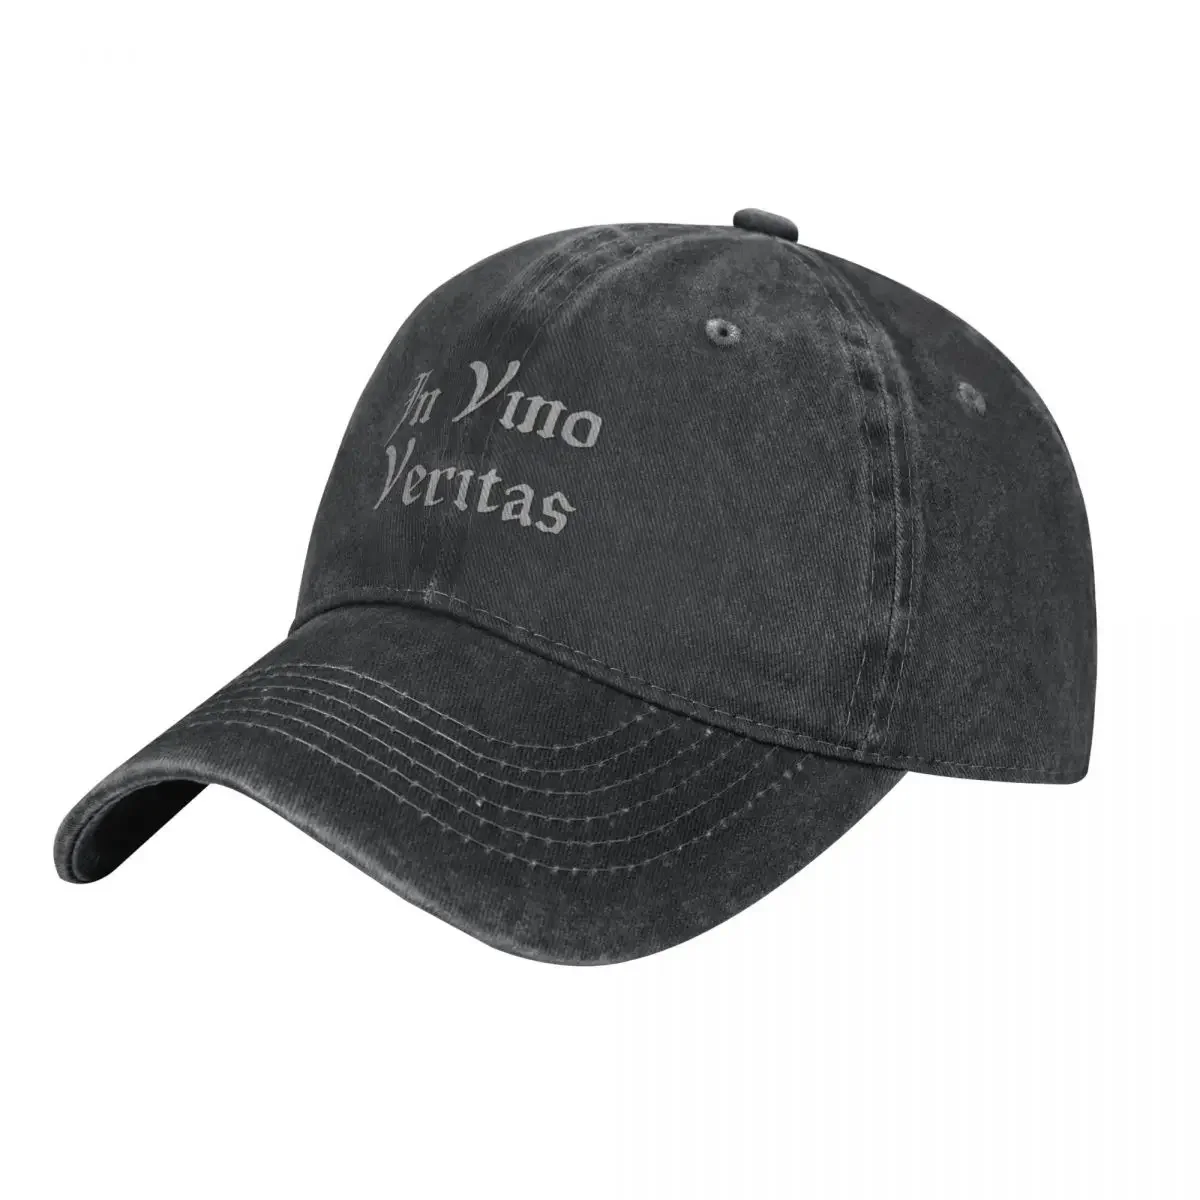 

In Vino Veritas - In wine, there is truth Latin Grey Design Cowboy Hat Hood Dropshipping Women's Golf Clothing Men's